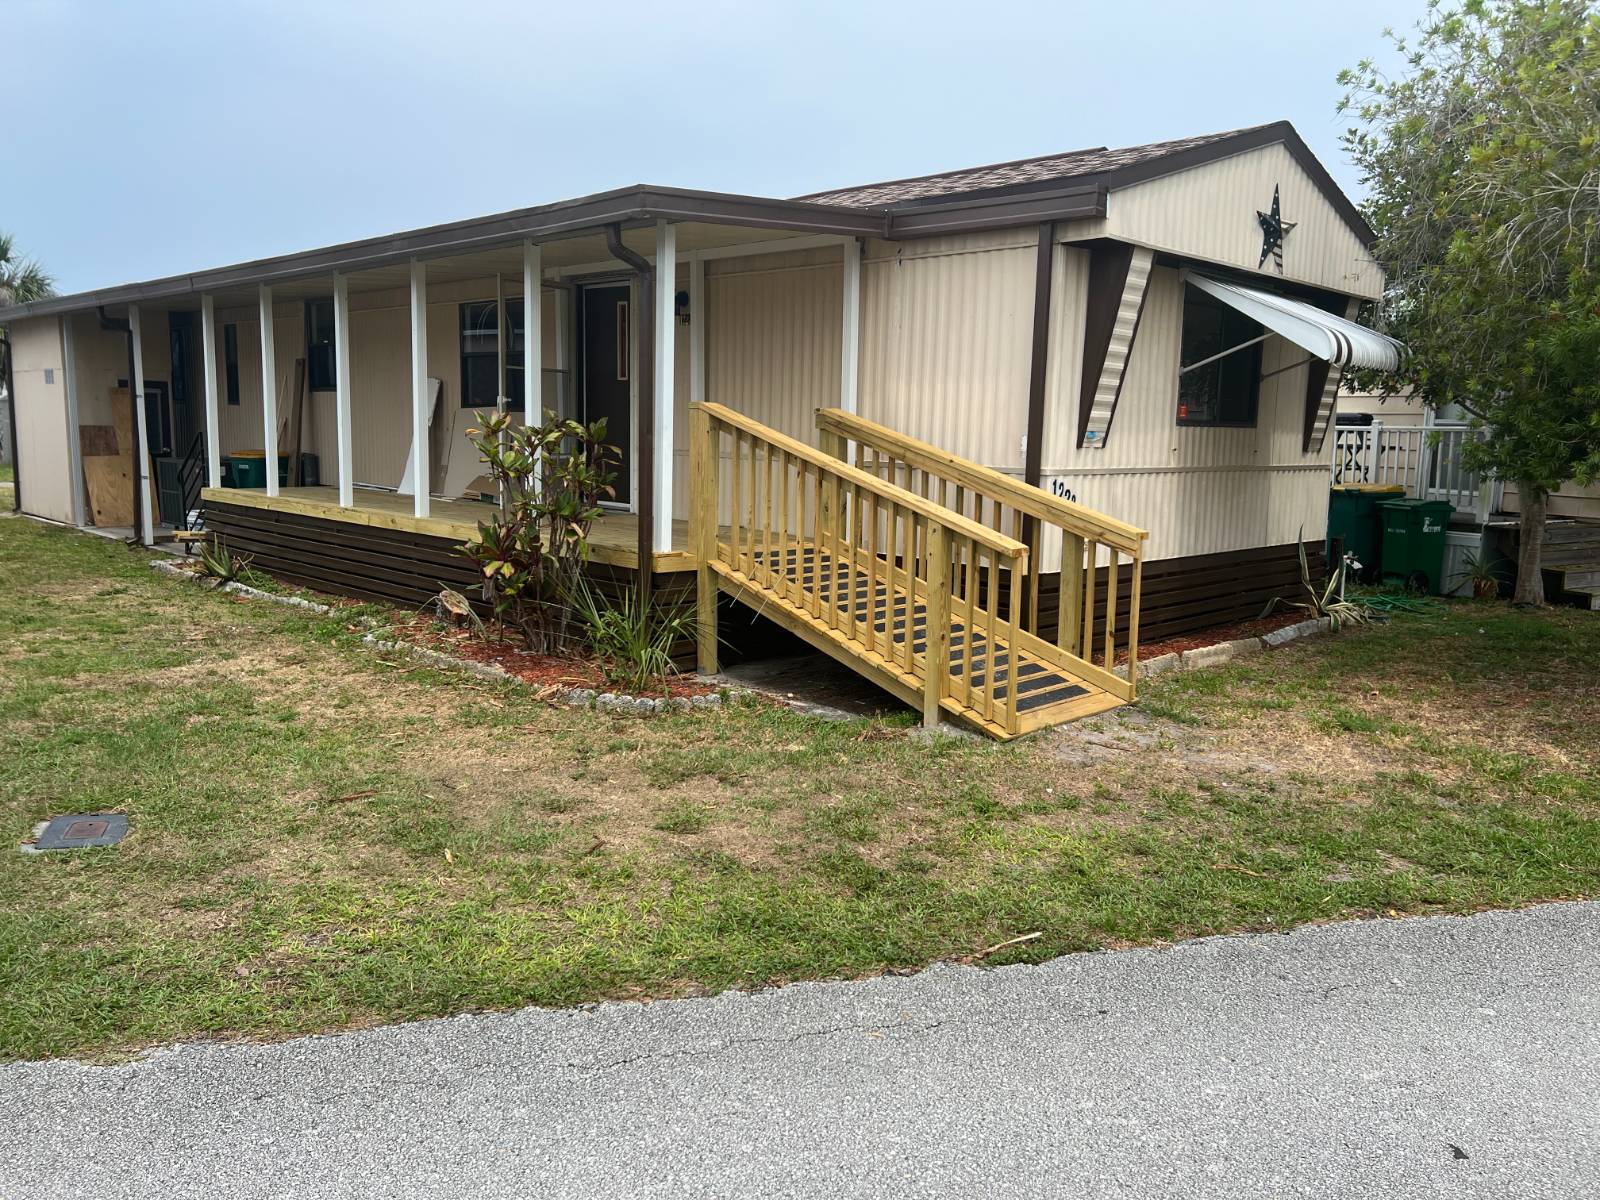 MAKE IT YOUR OWN.  This 1984, 14 x 60, 2 bedroom, 2 bath mobile home has all the major upgrades done! New roof 2024, New AC 2021, New Deck 2024, New plumbing and toilets,  New ceiling fans, and electrical upgrades are done.  You pick your flooring in the bedrooms and bathrooms, paint, and finishes.  Disclaimer:  Photos with furnishings are prior to renovations. Finish this project your way, and pay the lowest lot rent known to me. Only $206 per month ! (Current owner) Lot rent includes cable and trash pick up.